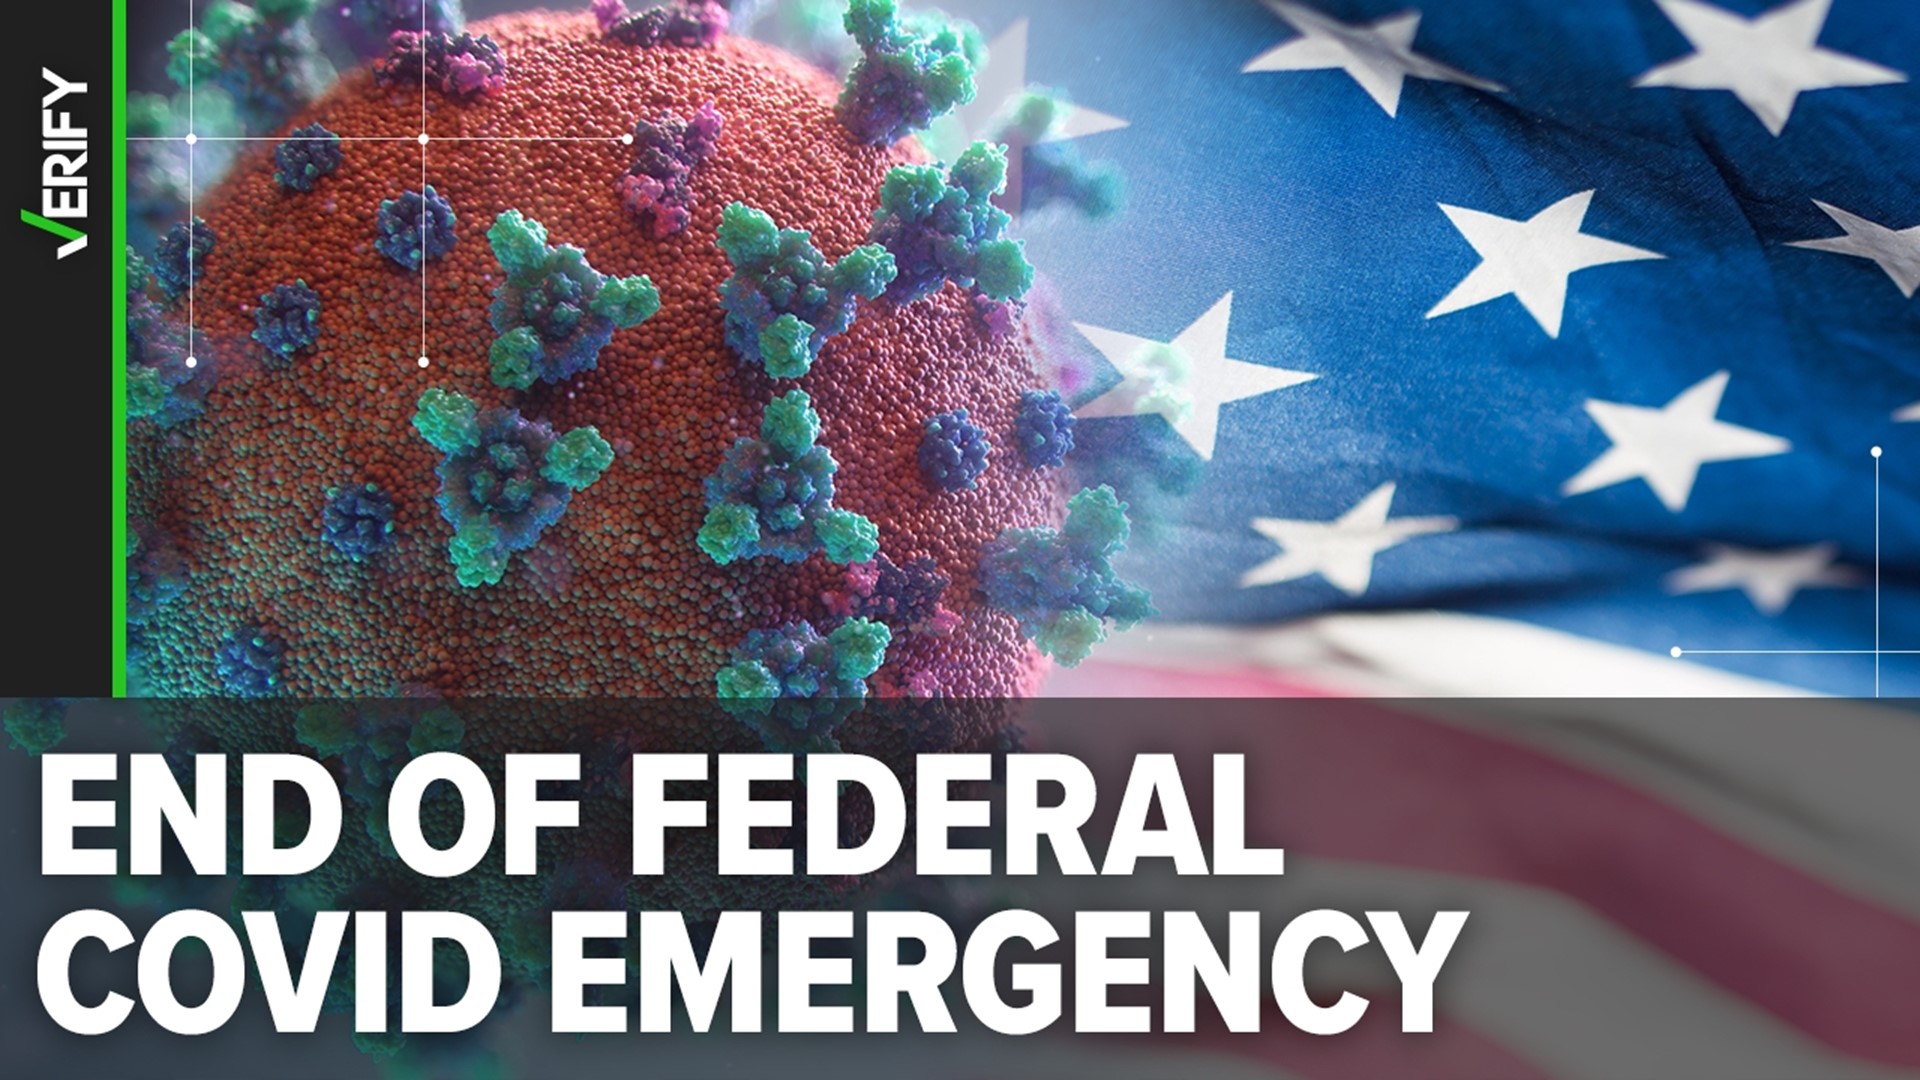 How to get COVID-19 tests and vaccines after the federal COVID-19 public health emergency declaration expires on May 11.